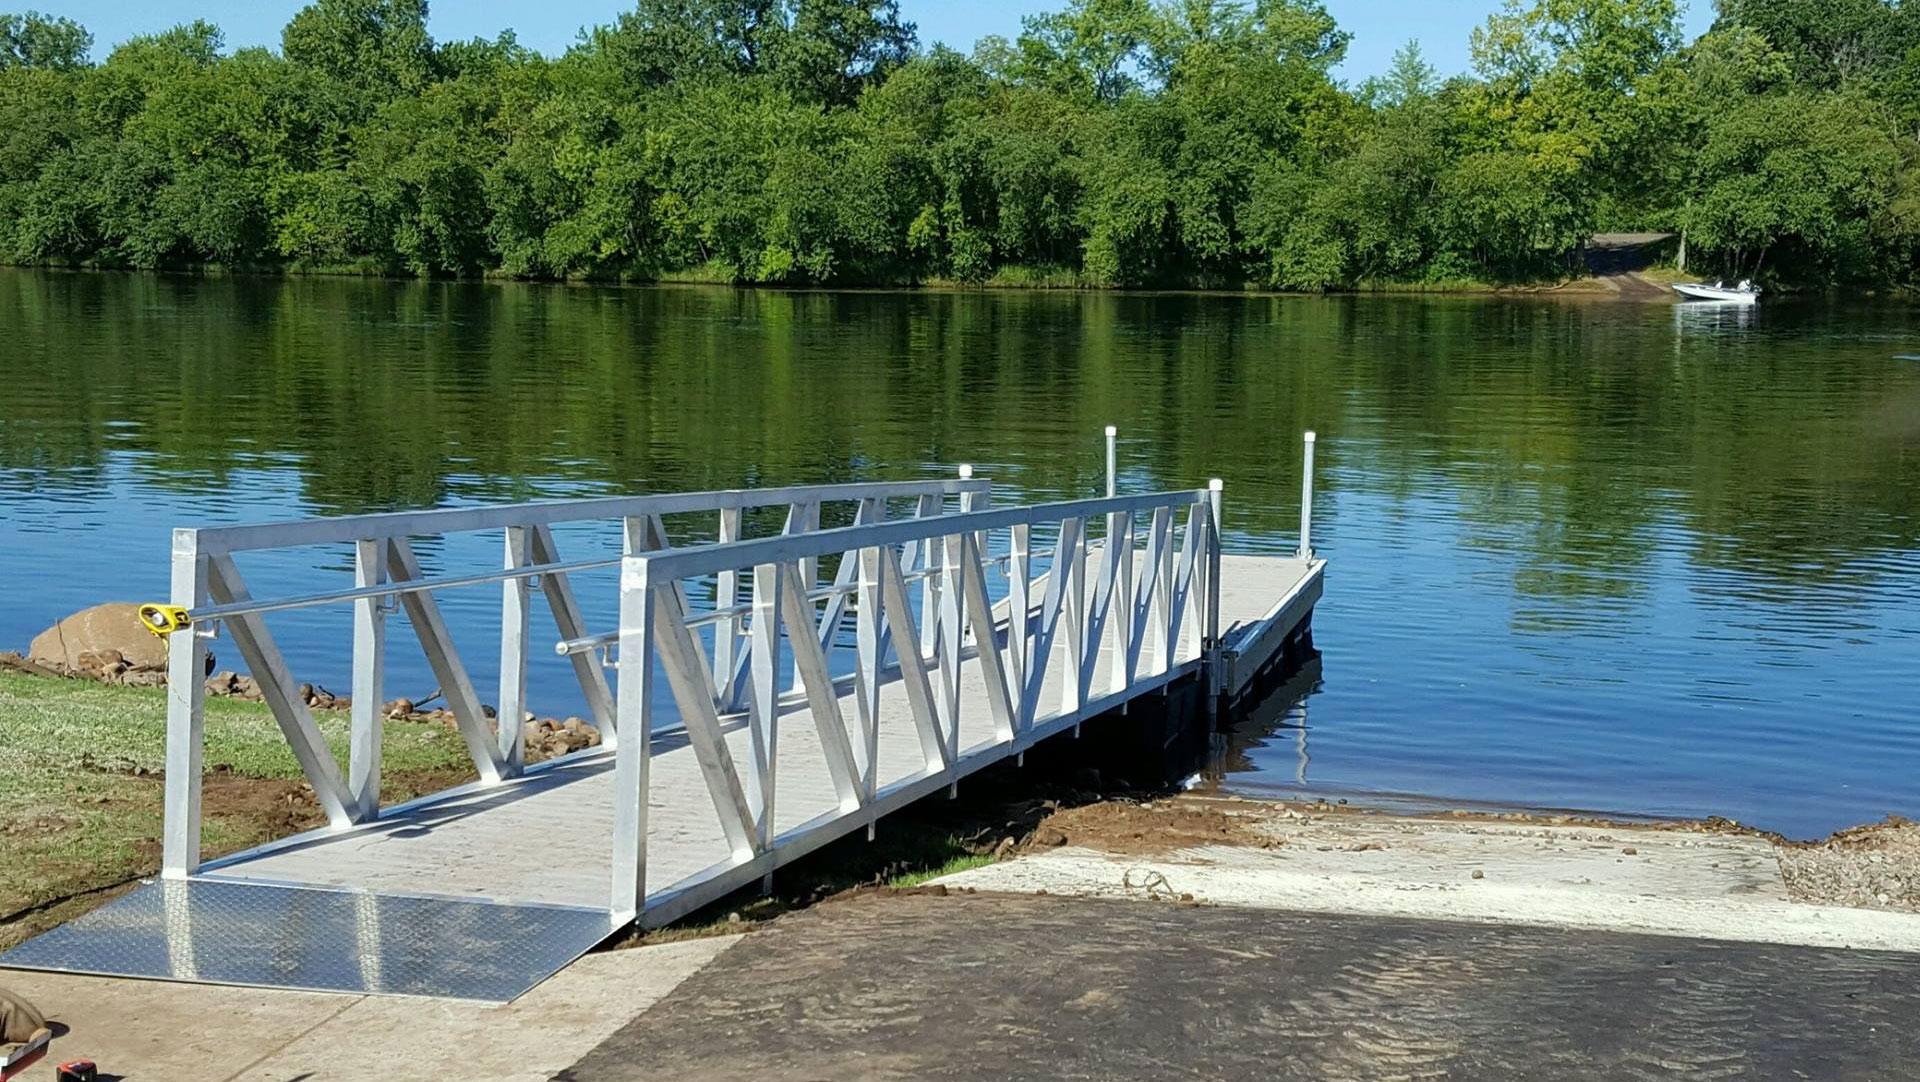 STATE OF THE ART Floating Docks